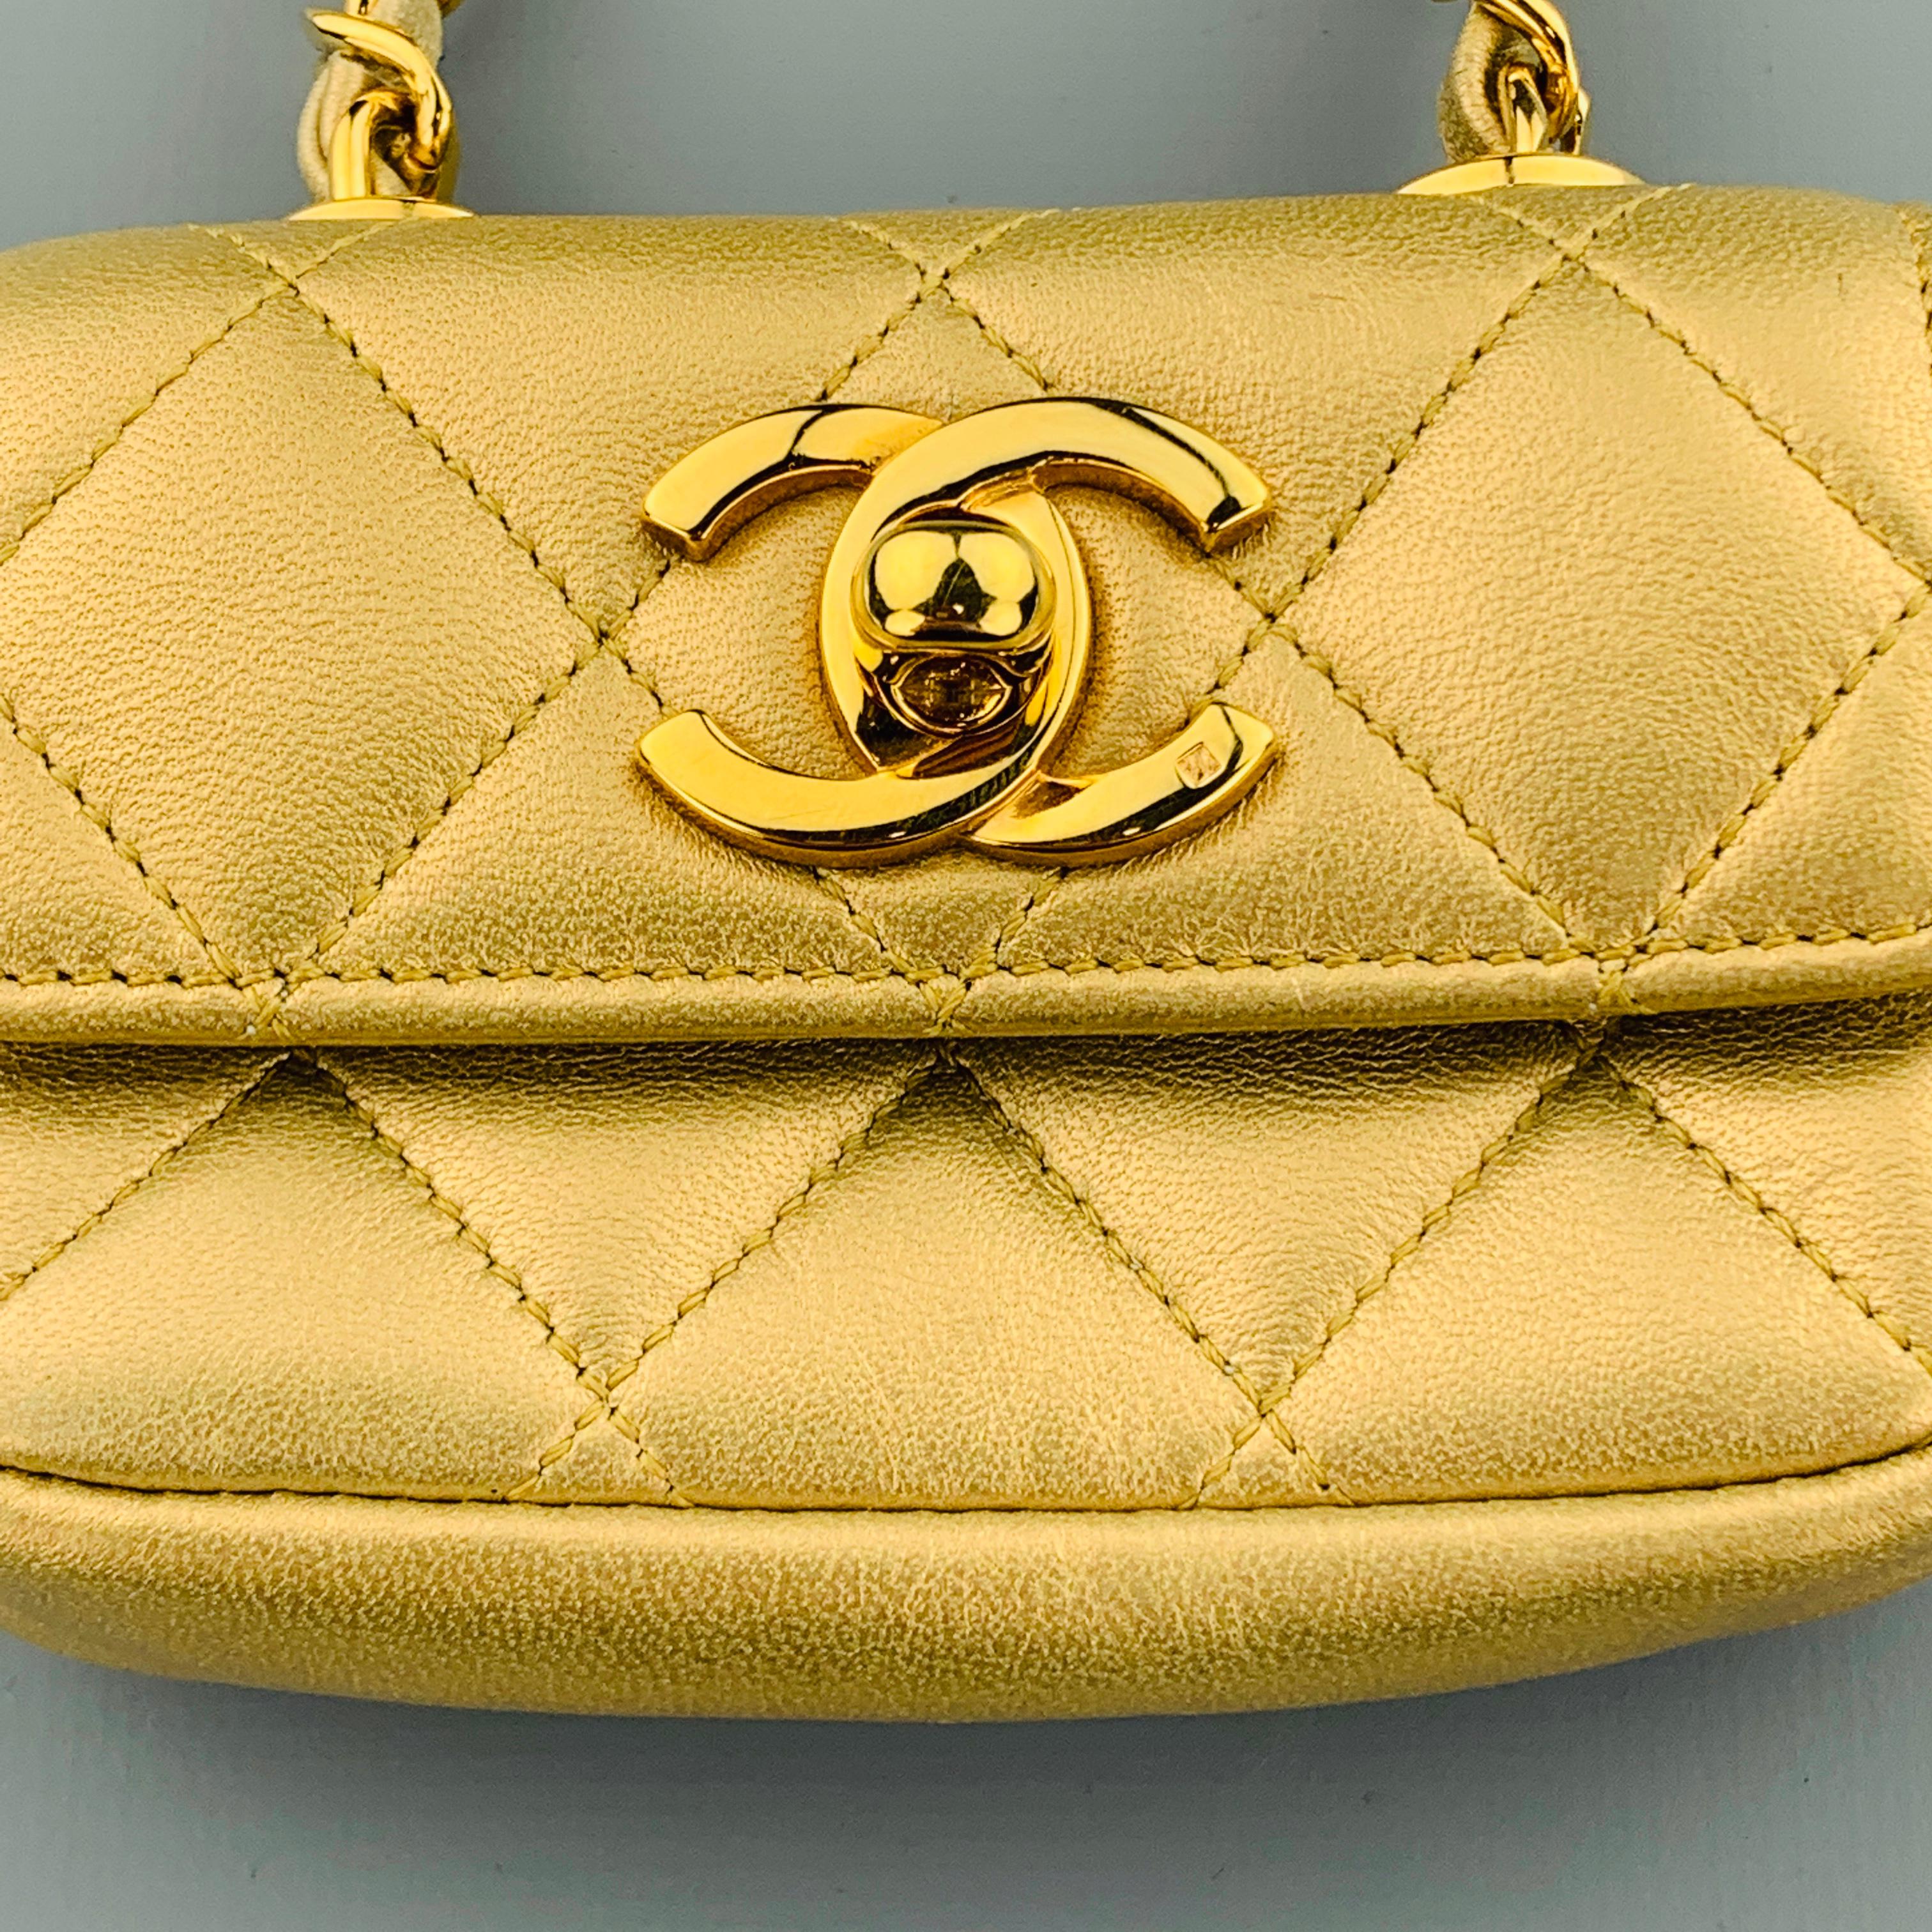 Vintage CHANEL mini purse coin pouch comes in metallic gold quilted leather with a flap top, yellow gold tone CC logo turn lock closure, and leather woven chain with Belt loop. Made in Italy.
 
Excellent Pre-Owned Condition.
Marked: 2308426
